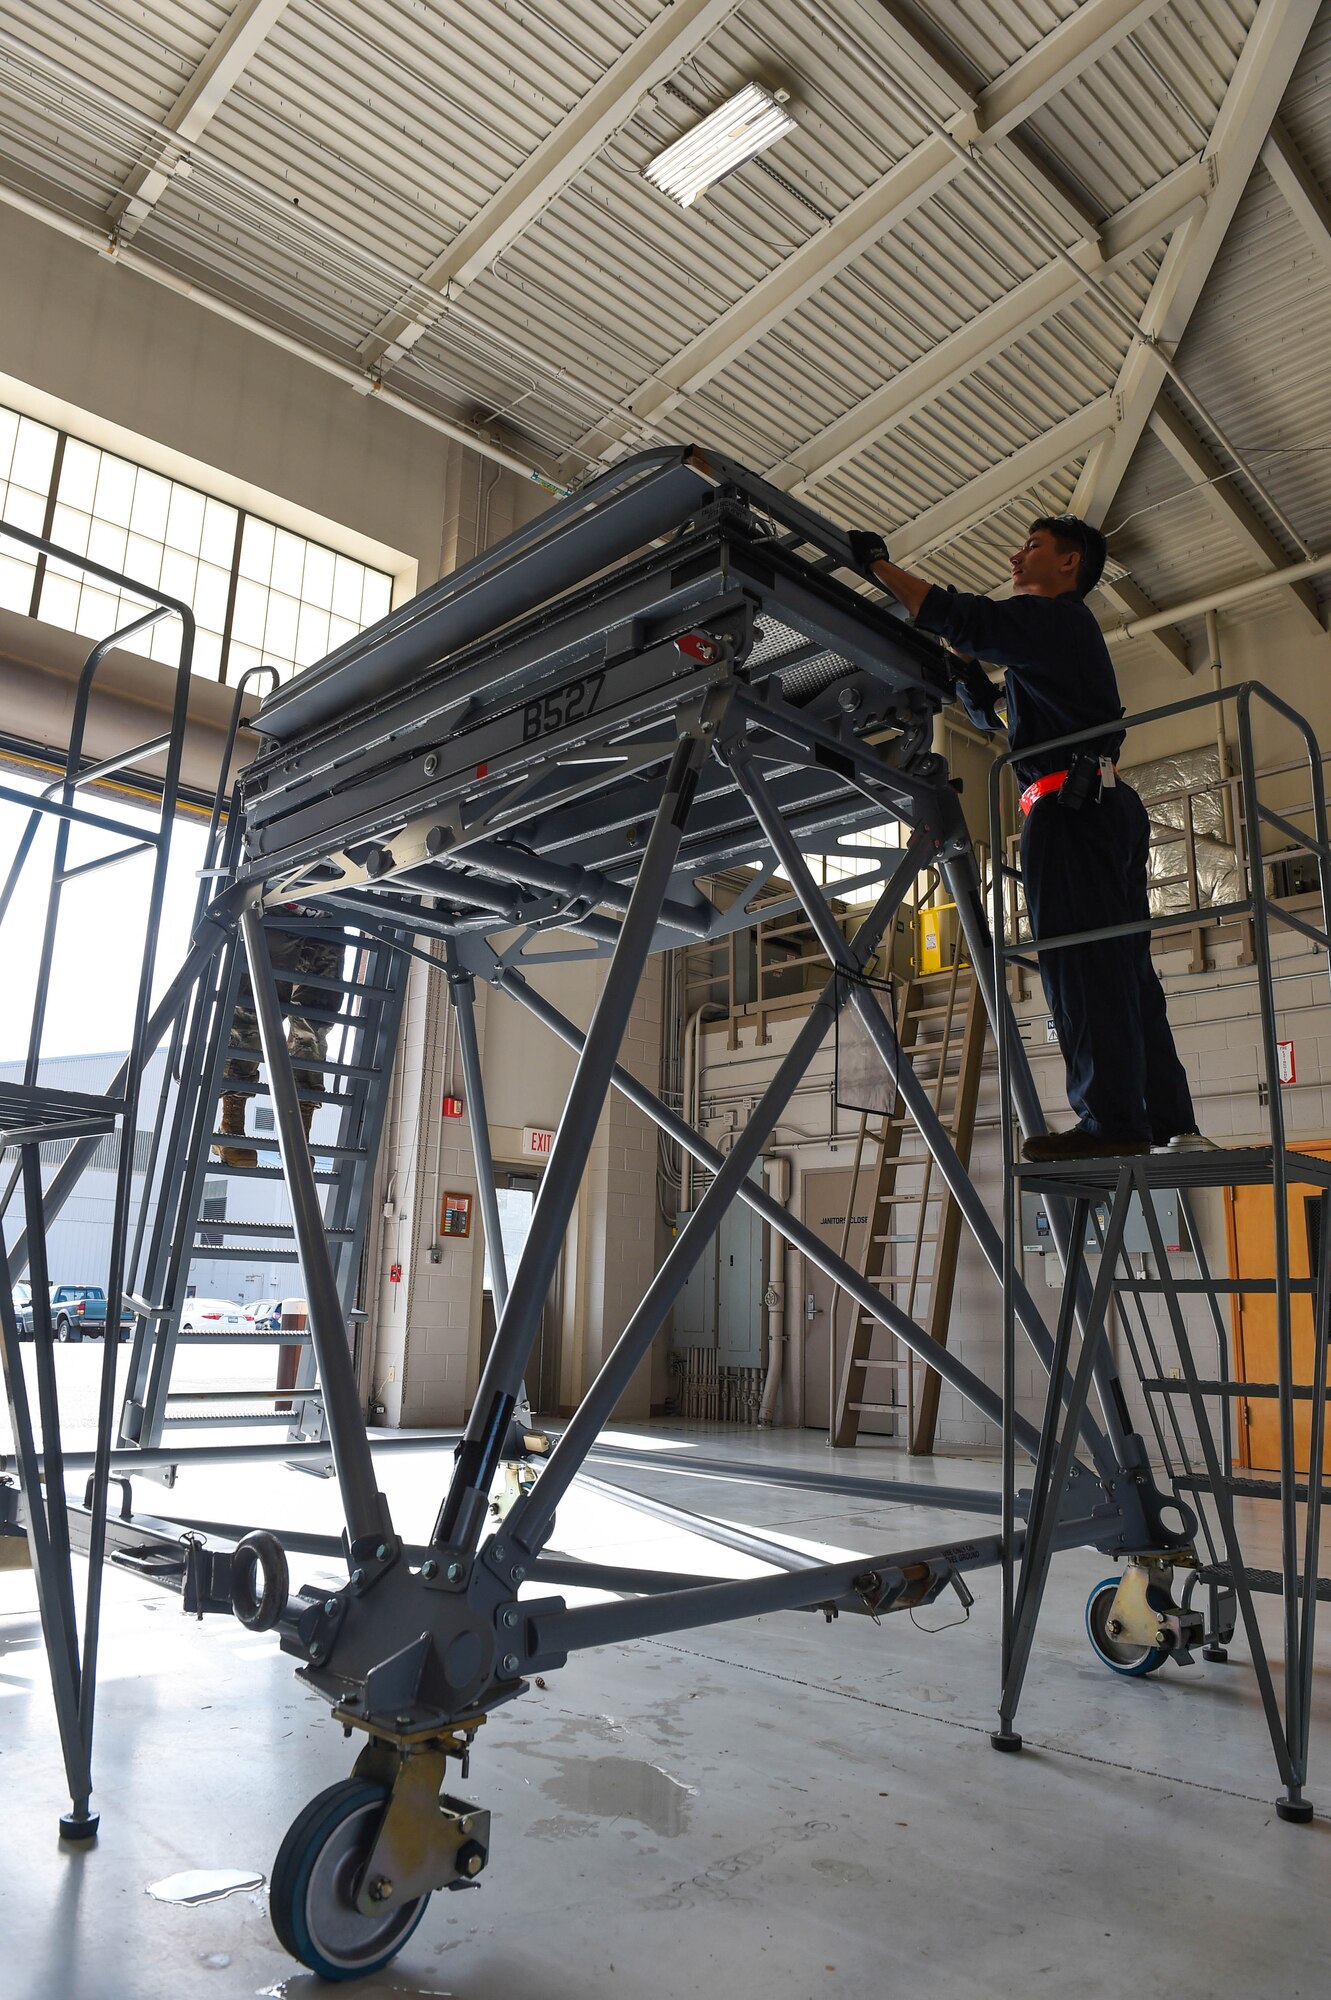 Senior Airman Christian Inscoe, 62nd Maintenance Squadron aerospace ground equipment (AGE) journeyman, works on securing a stand to prepare it for loading onto an aircraft on Joint Base Lewis-McChord, Wash., Aug. 3, 2020. Stands are typically used by maintenance personnel to inspect aircraft engines and other parts on a plane that are high up. (U.S. Air Force photo by Airman 1st Class Mikayla Heineck)